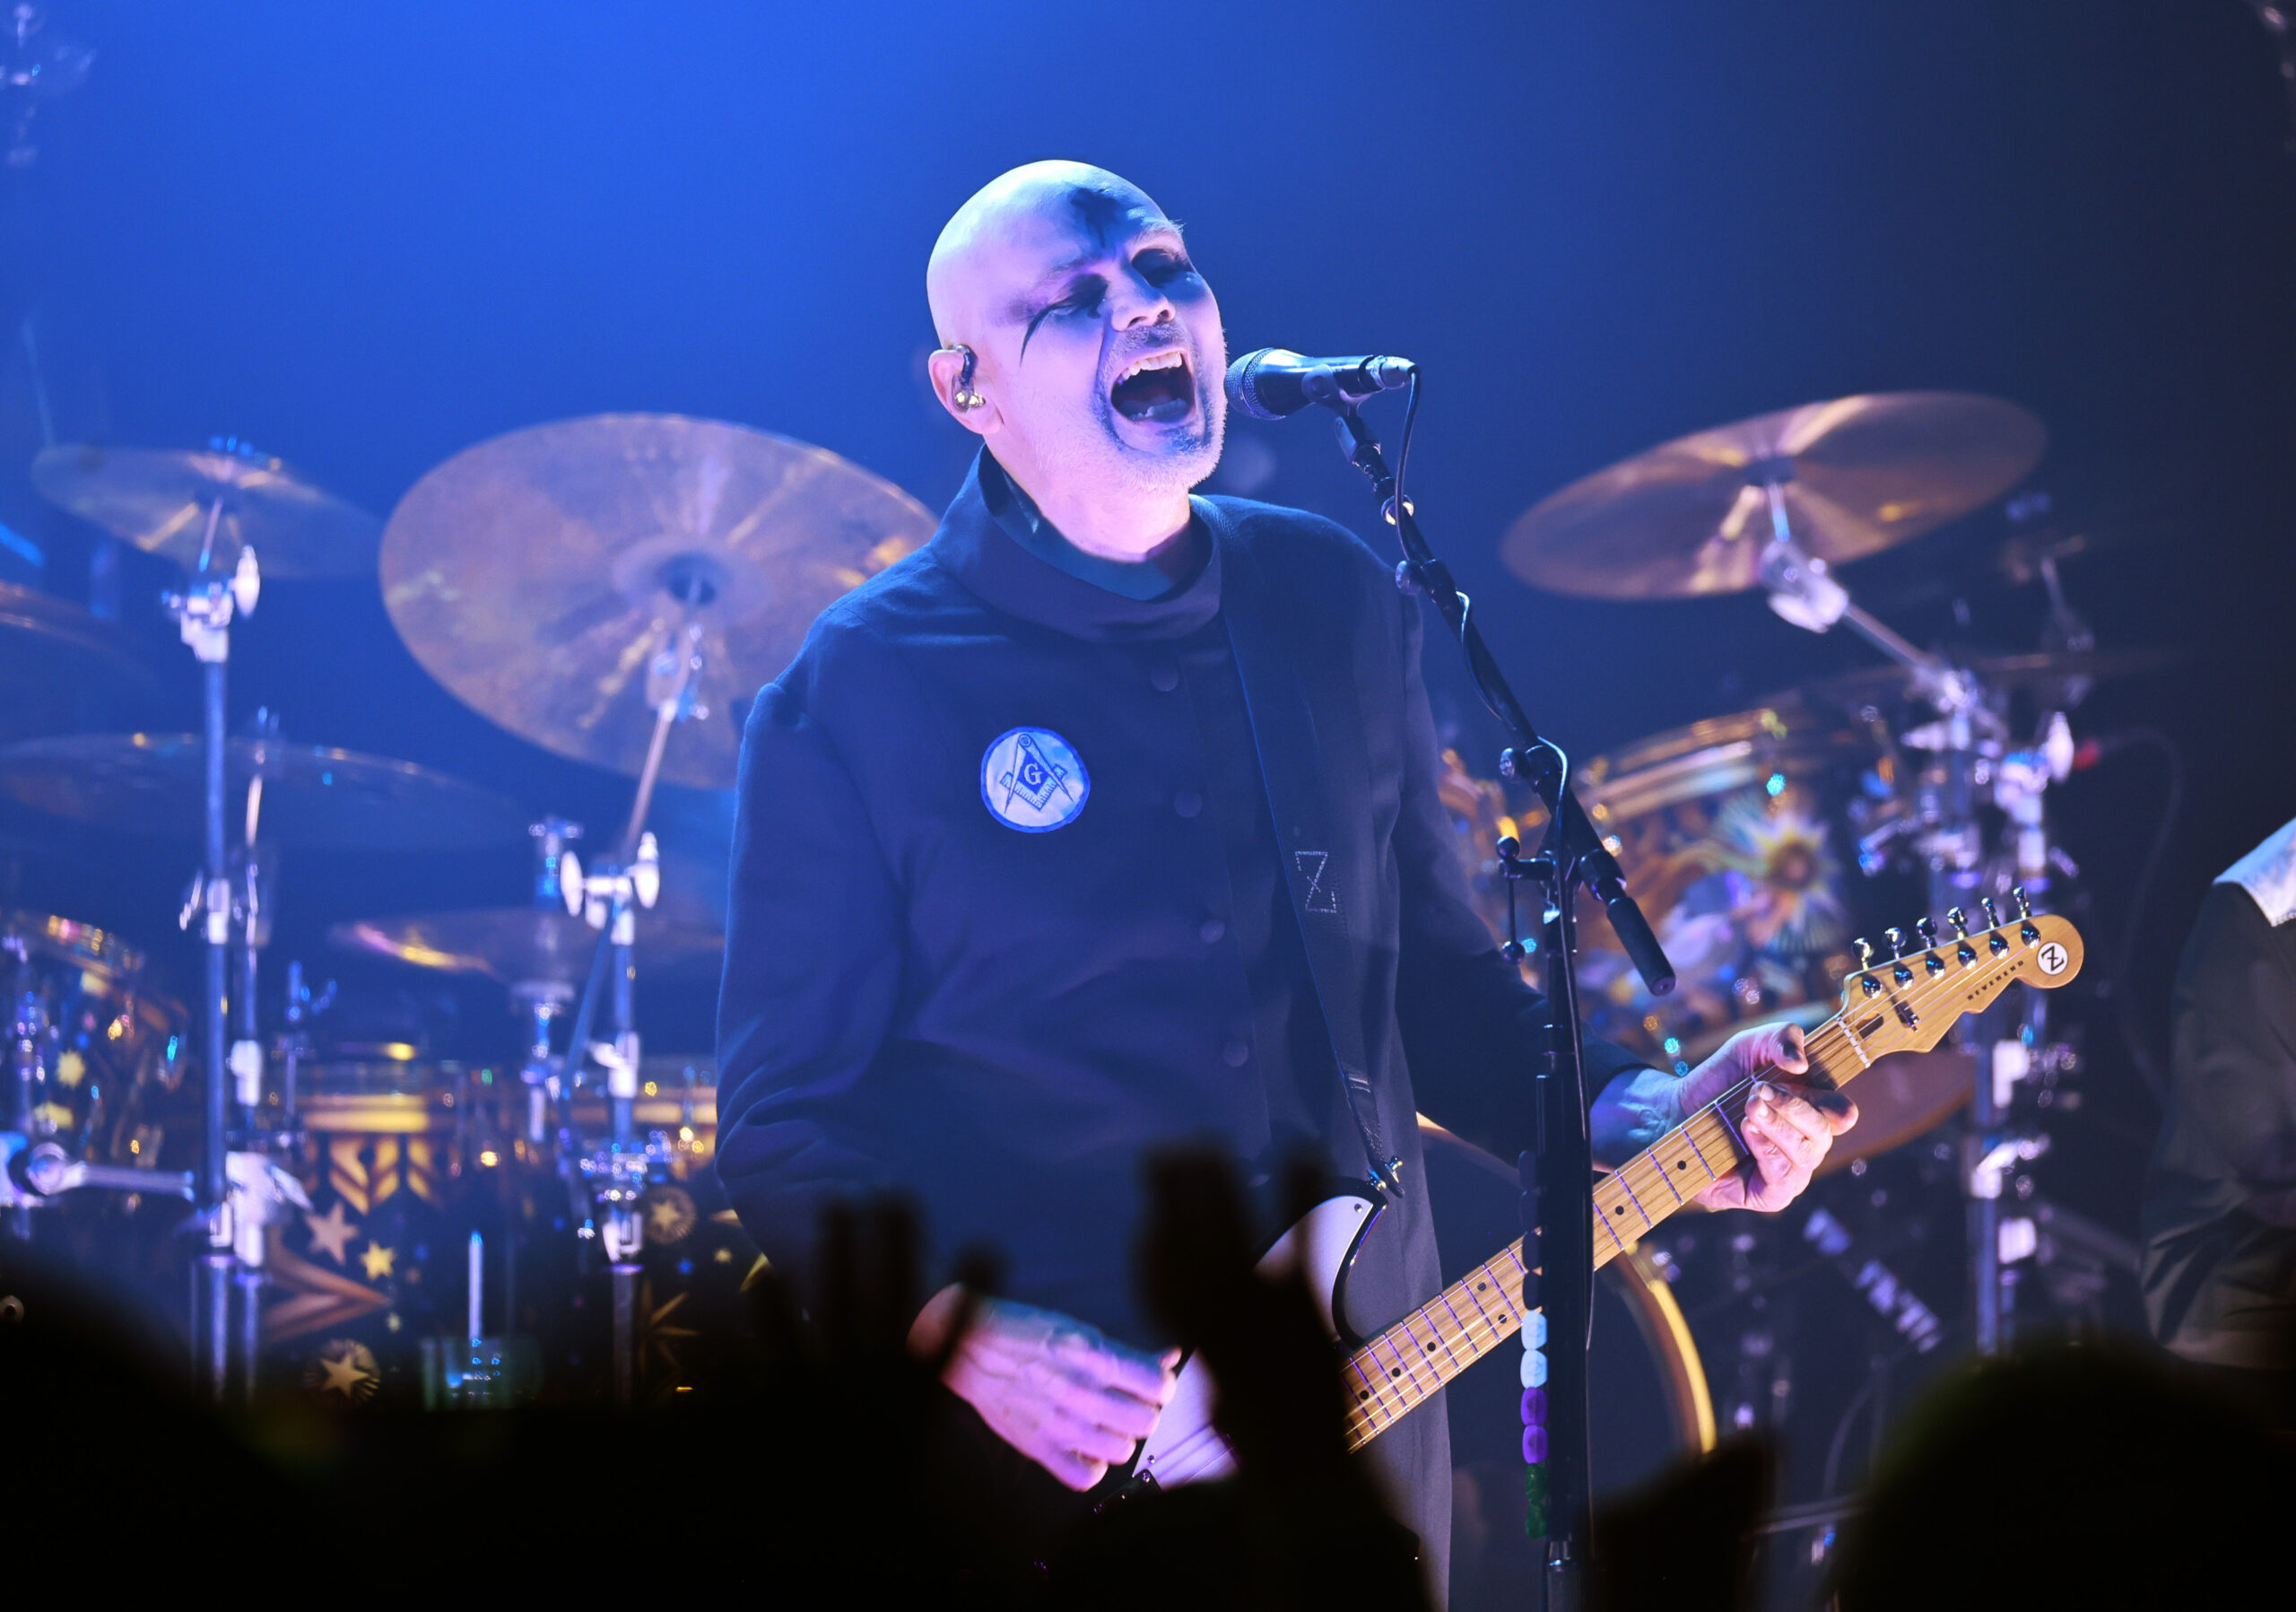 See Smashing Pumpkins and Other Big Acts at These Super-Intimate North Bay Venues